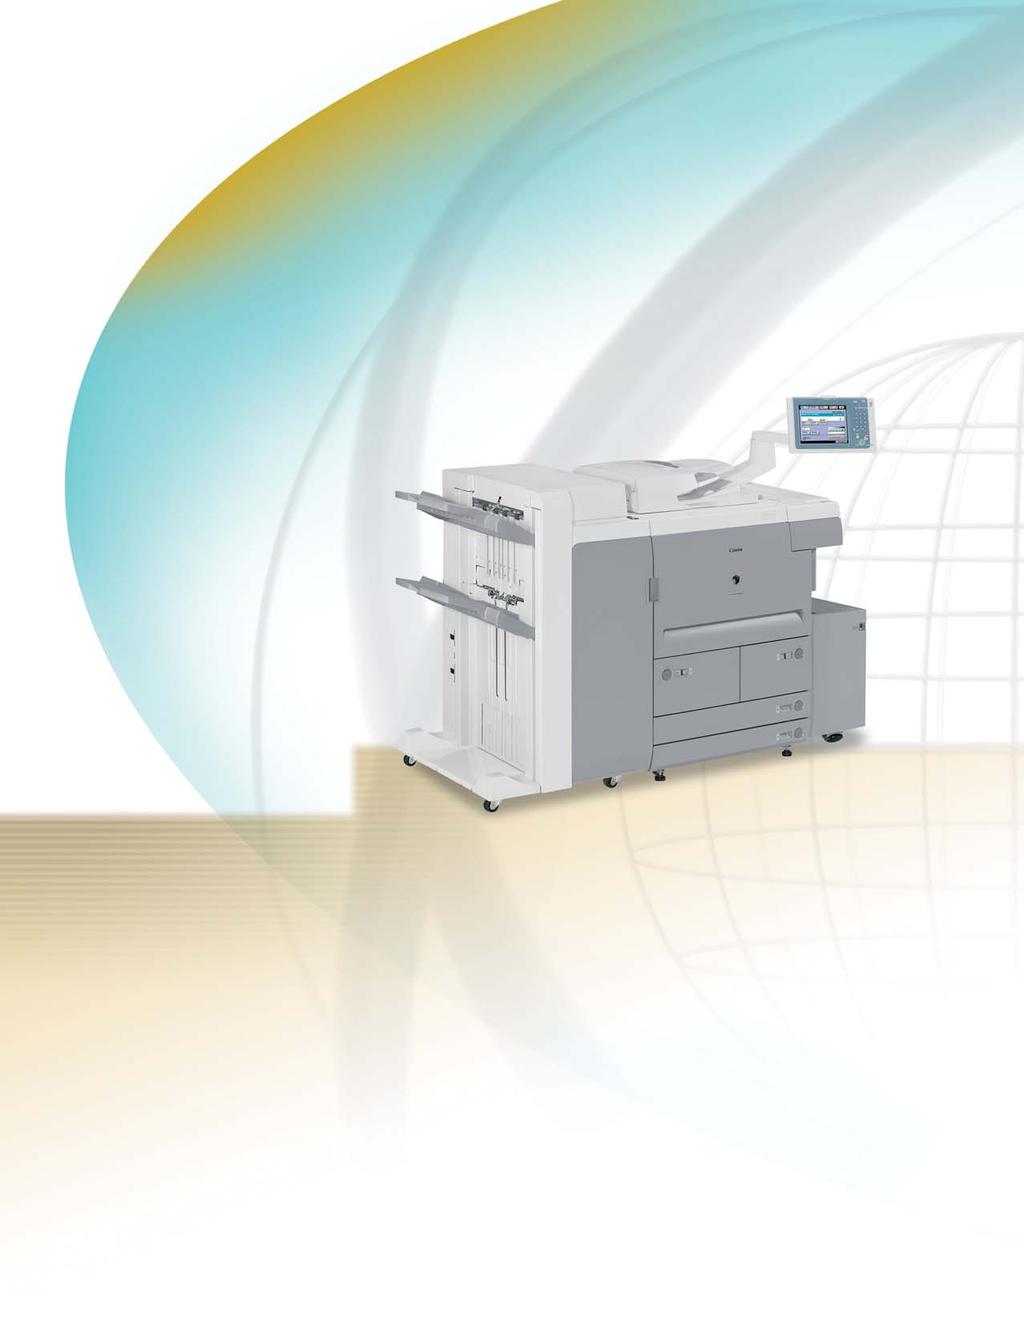 Production Solutions CHALLENGE YOUR DOCUMENT PRODUCTION STANDARDS High-speed imagerunner technology meets the rigors of high-volume offices and production environments with unmatched versatility.